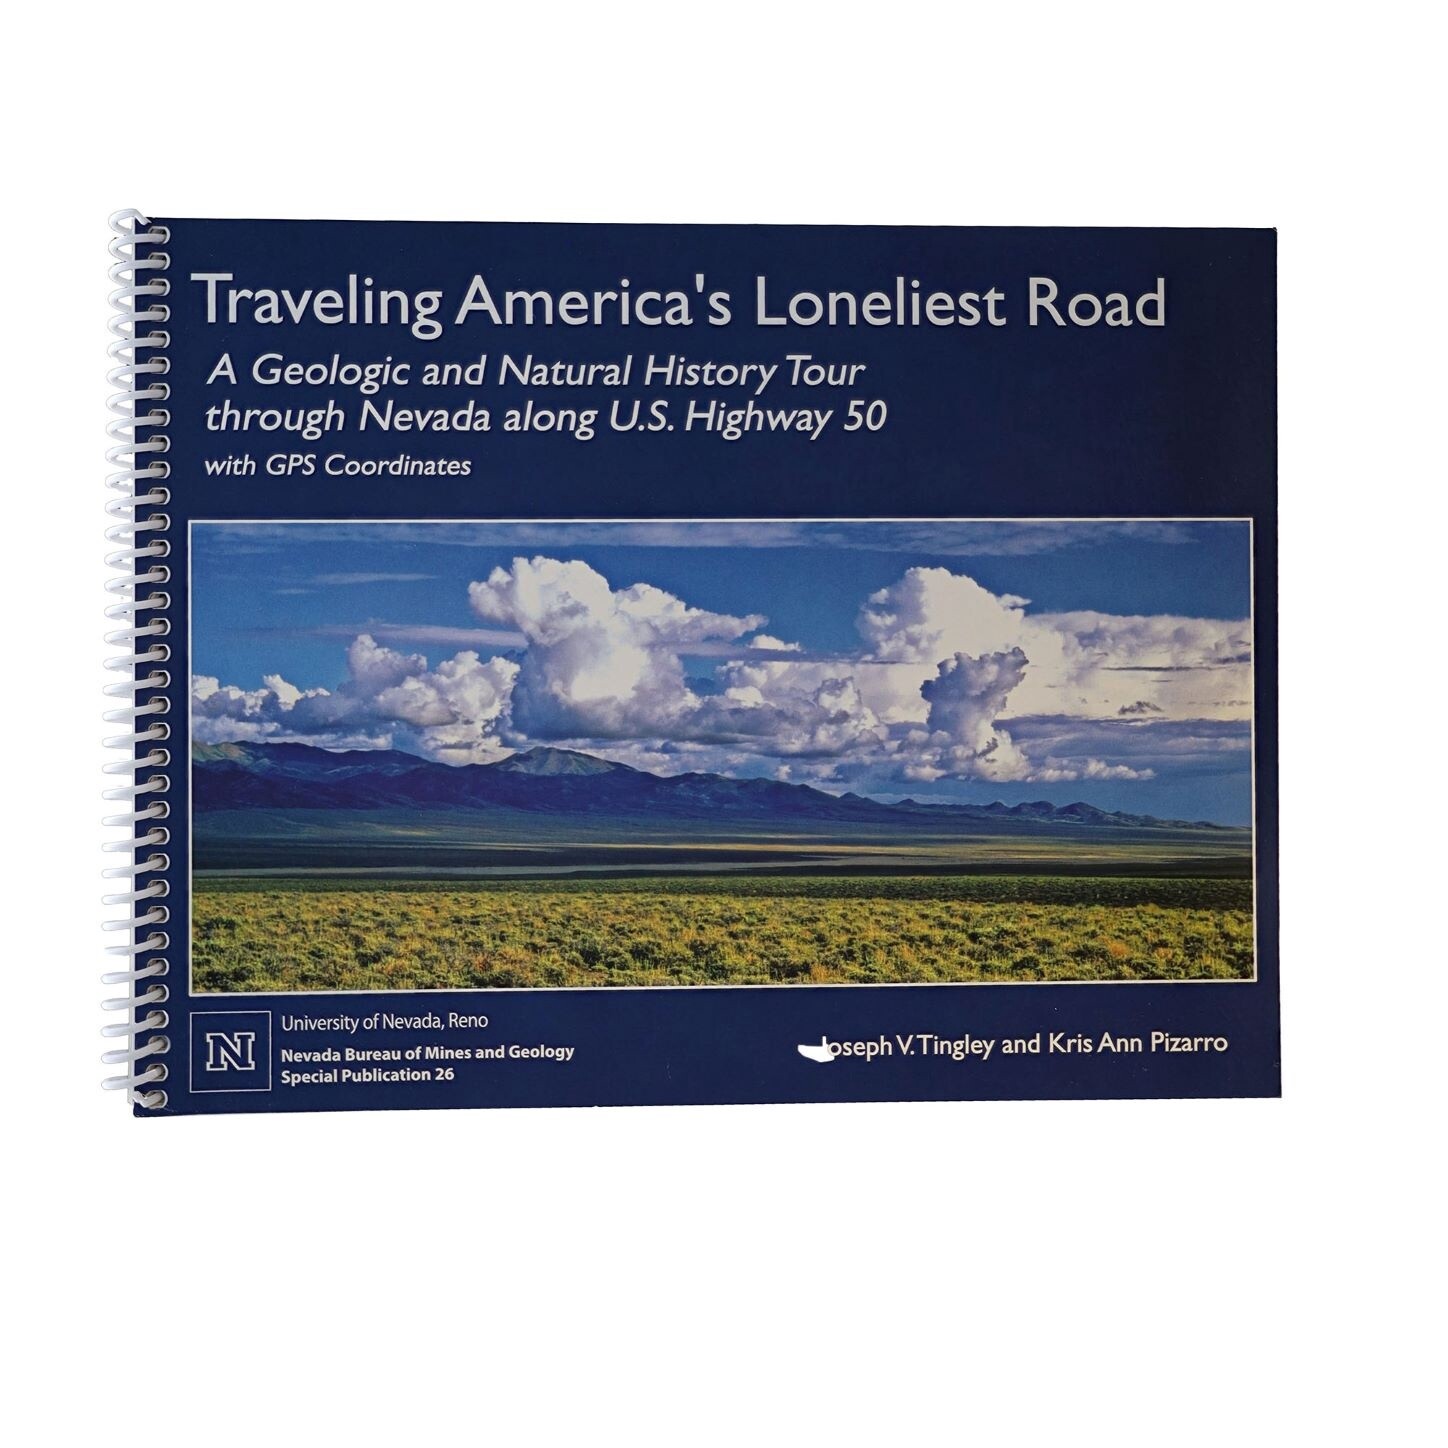 Traveling America's Loneliest Road by Joseph V. Tingley and Kris Ann Pizarro